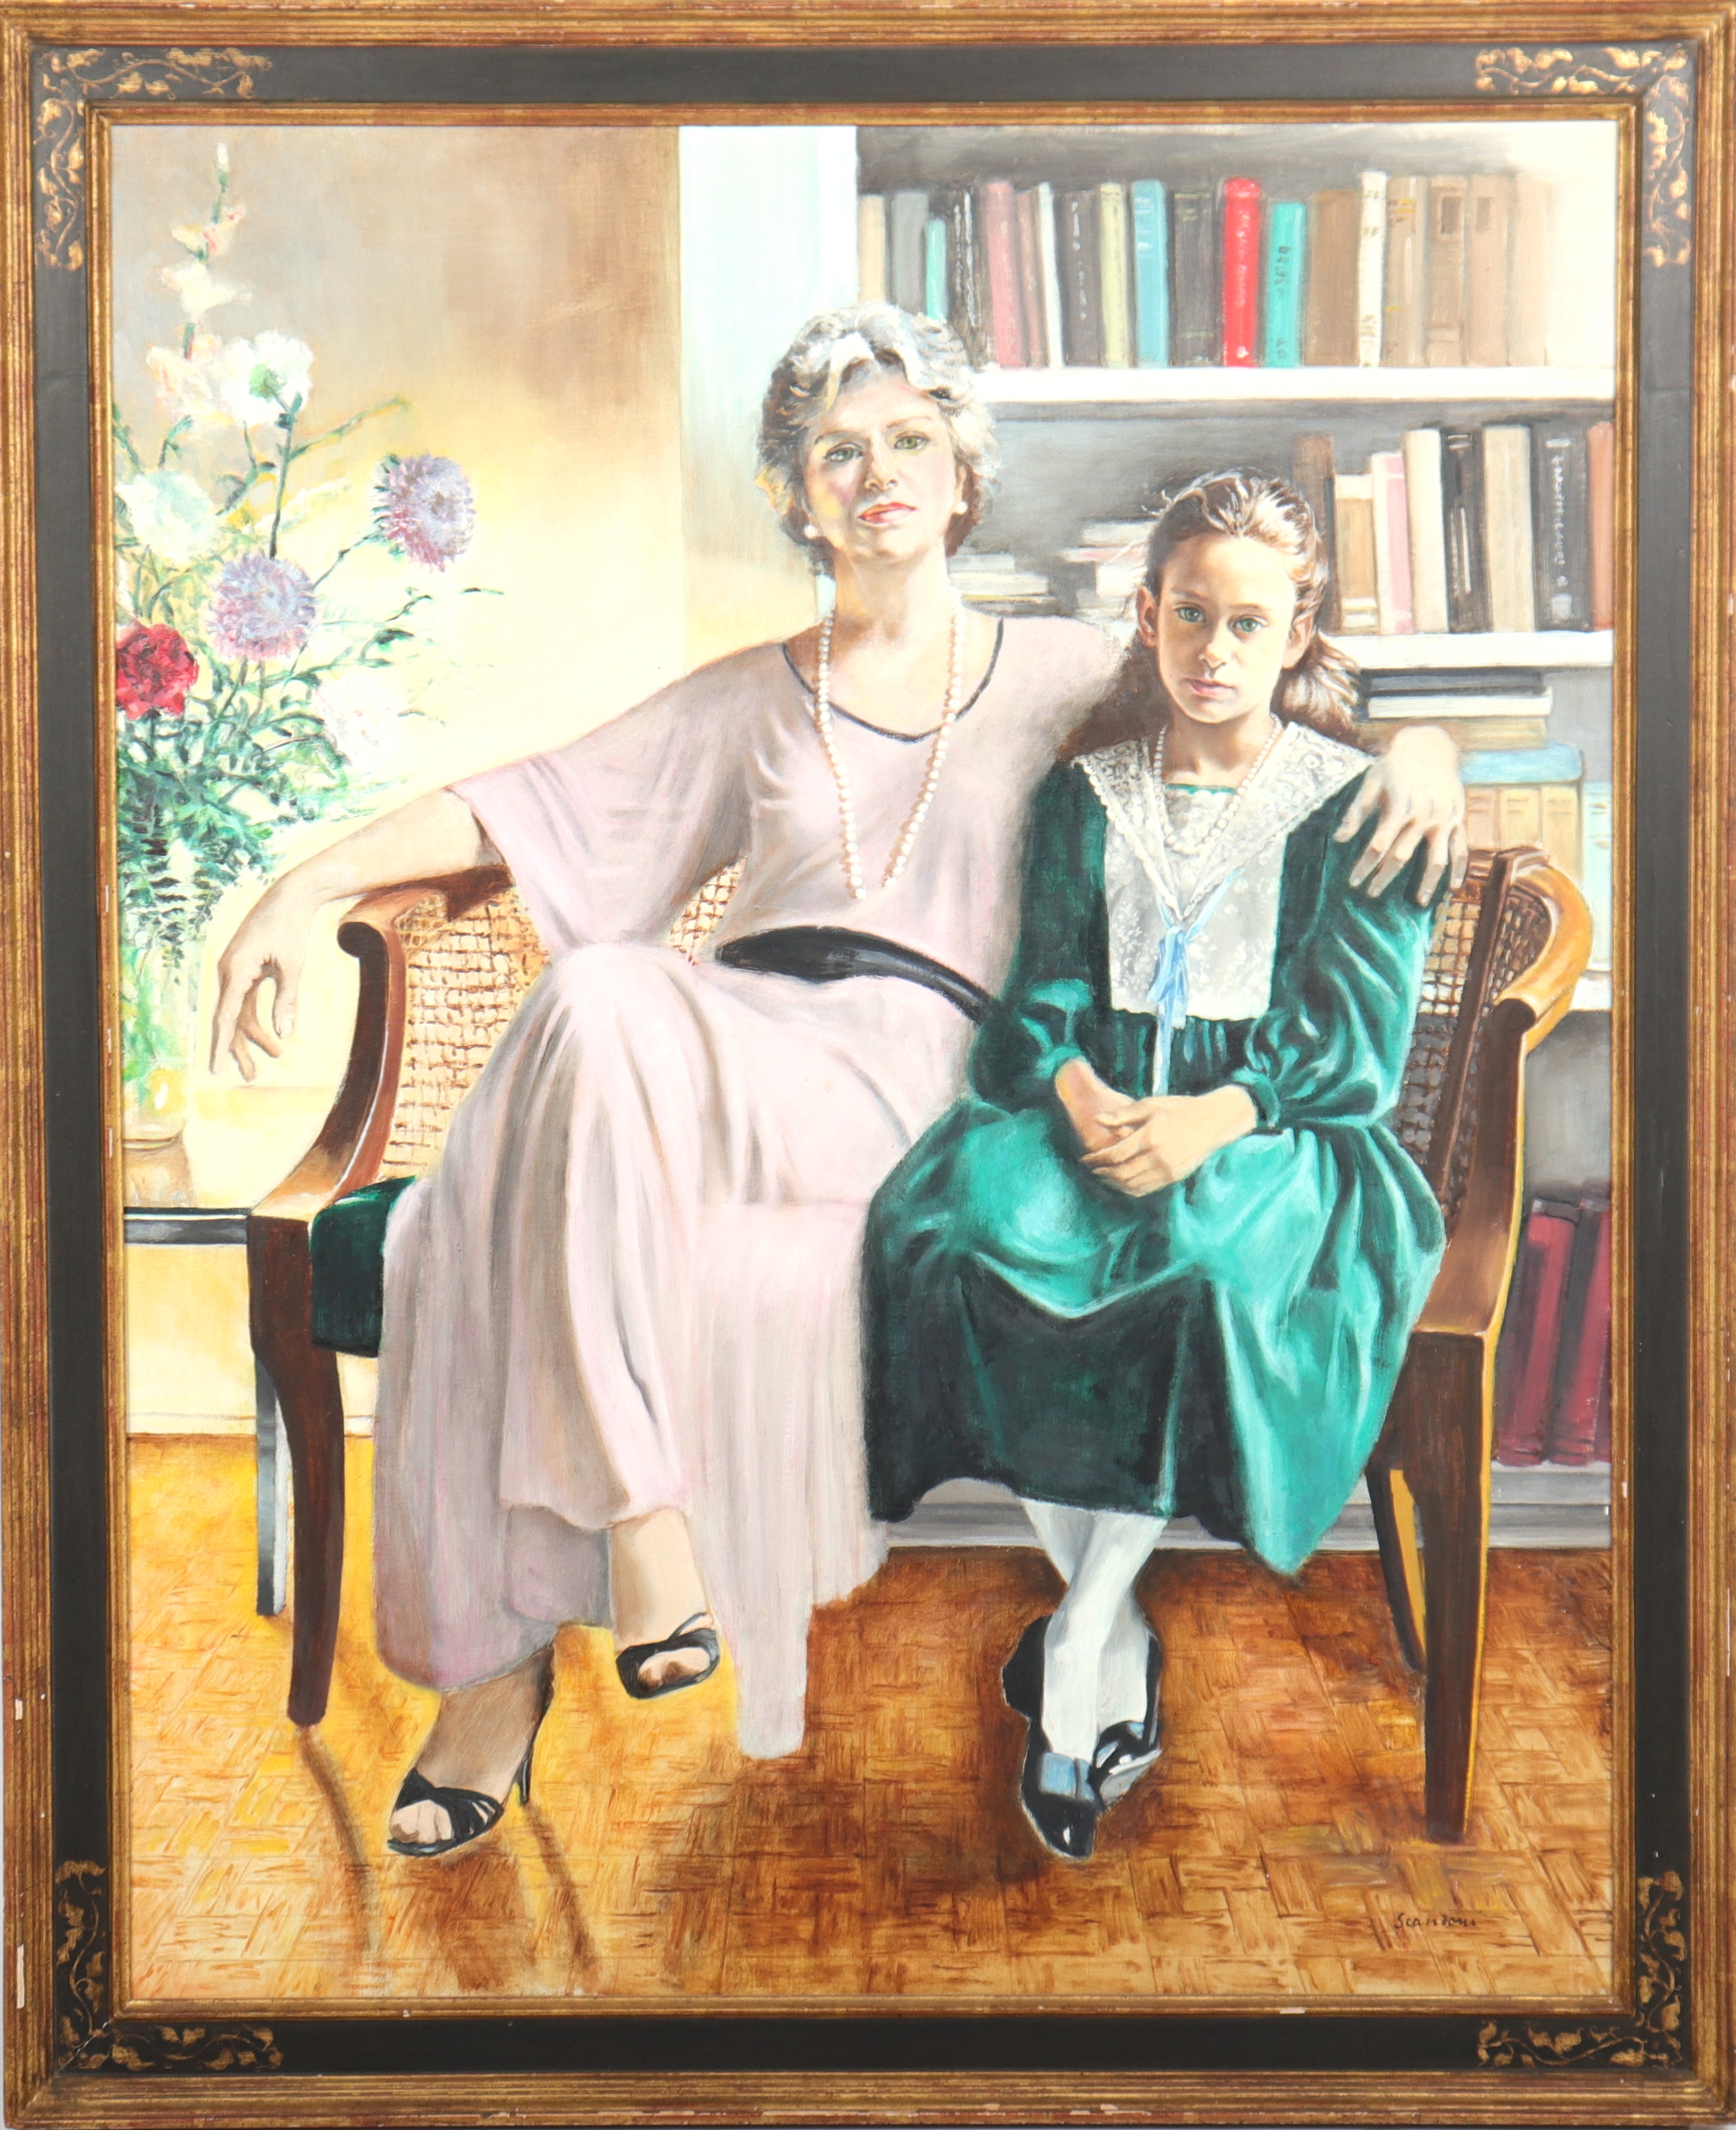 SIGNED SCANZONI MOTHER DAUGHTER  3c373b